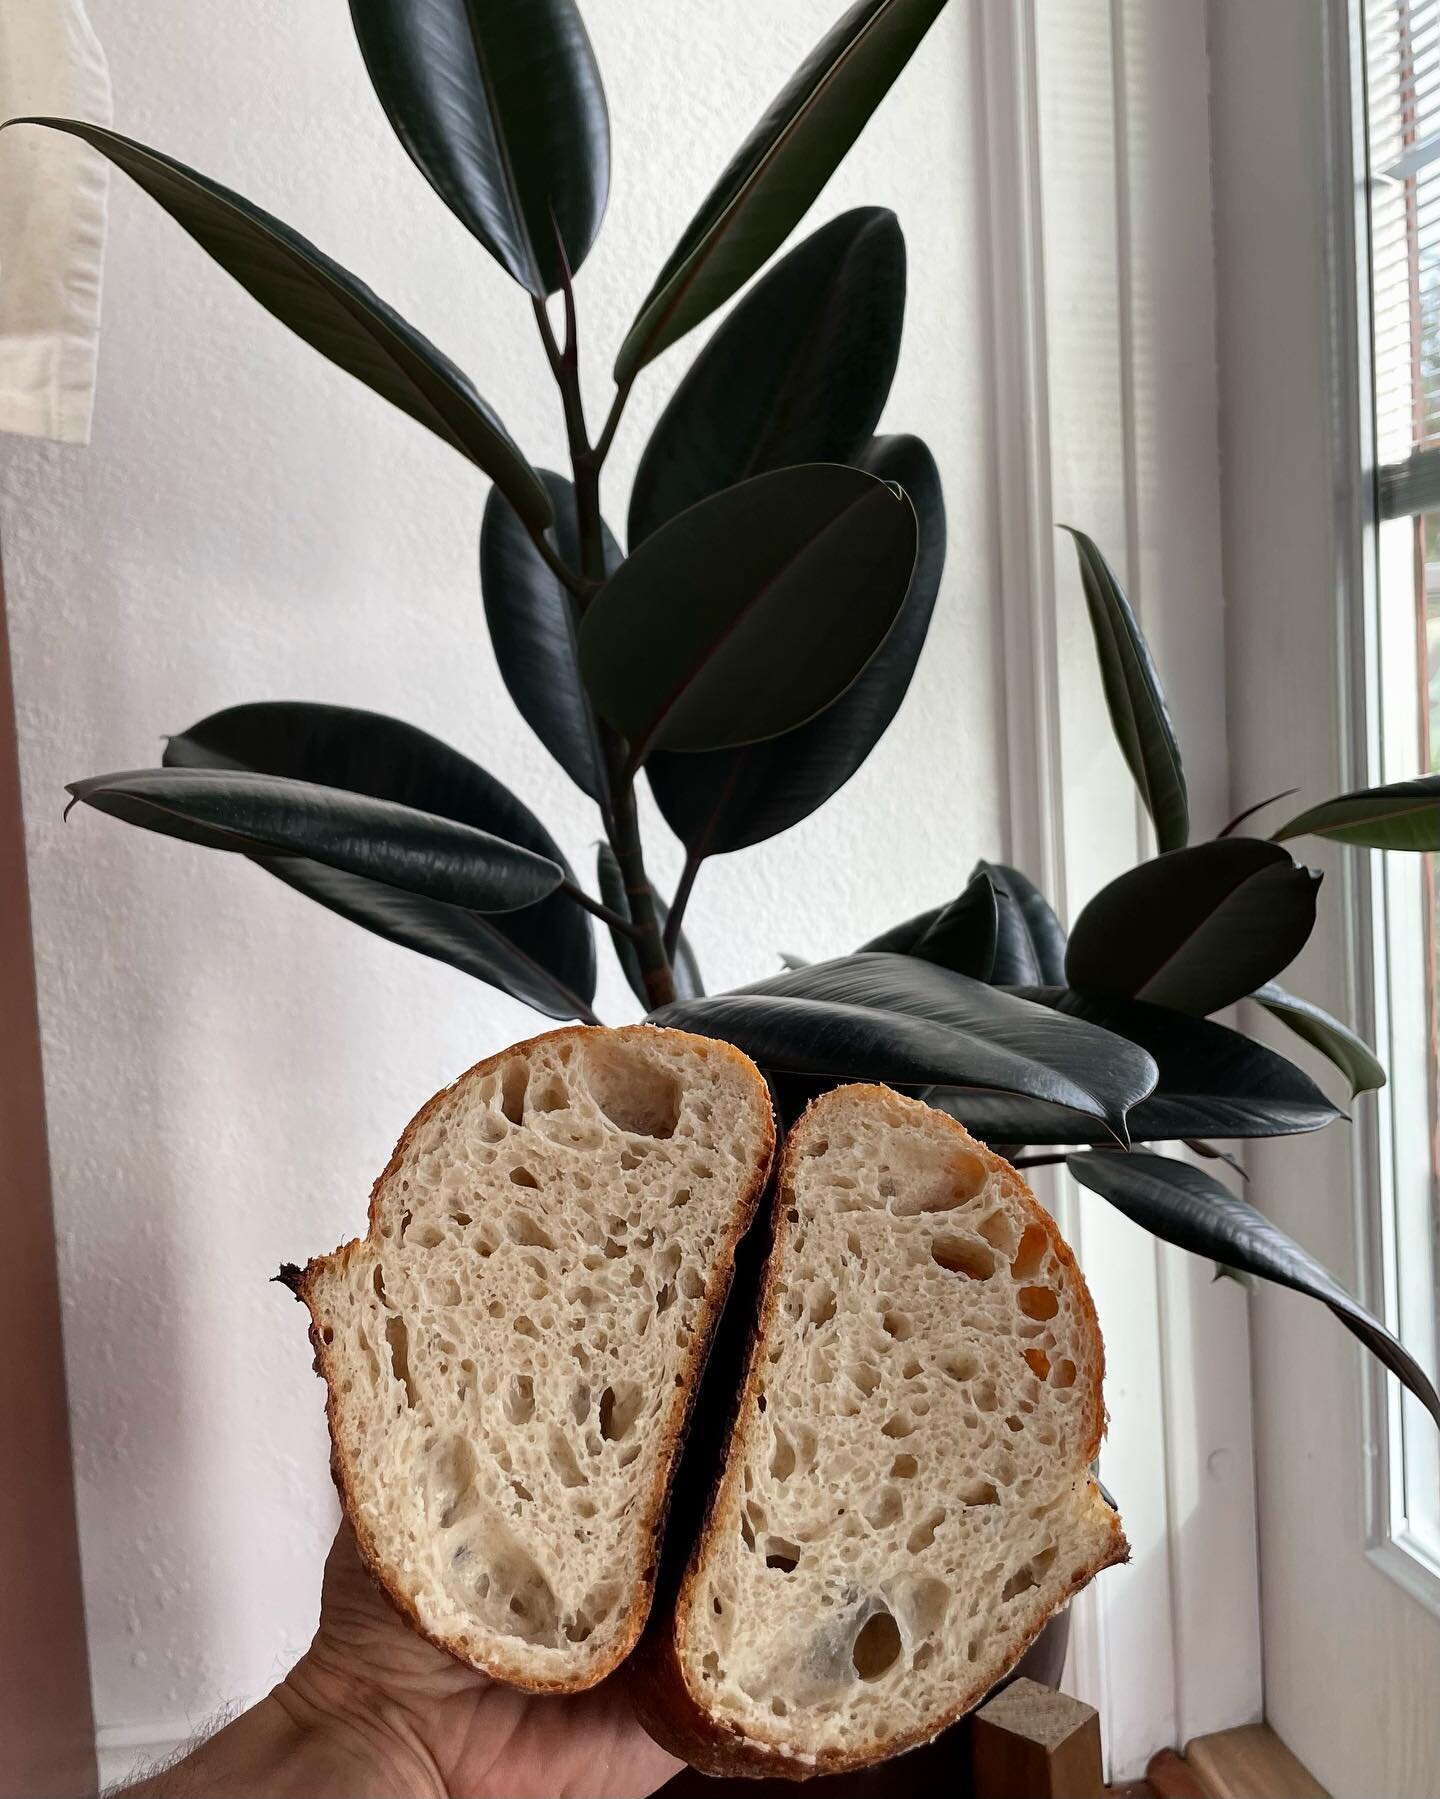 Sourdough loaf and a burgundy rubber tree. Both beautiful, not both edible.
.
Sustainably Made in Alaska with 100% organic ingredients
.
Packaged in biodegradable pouches
.
A portion of profits go toward conservation of Alaska's wild natural environm